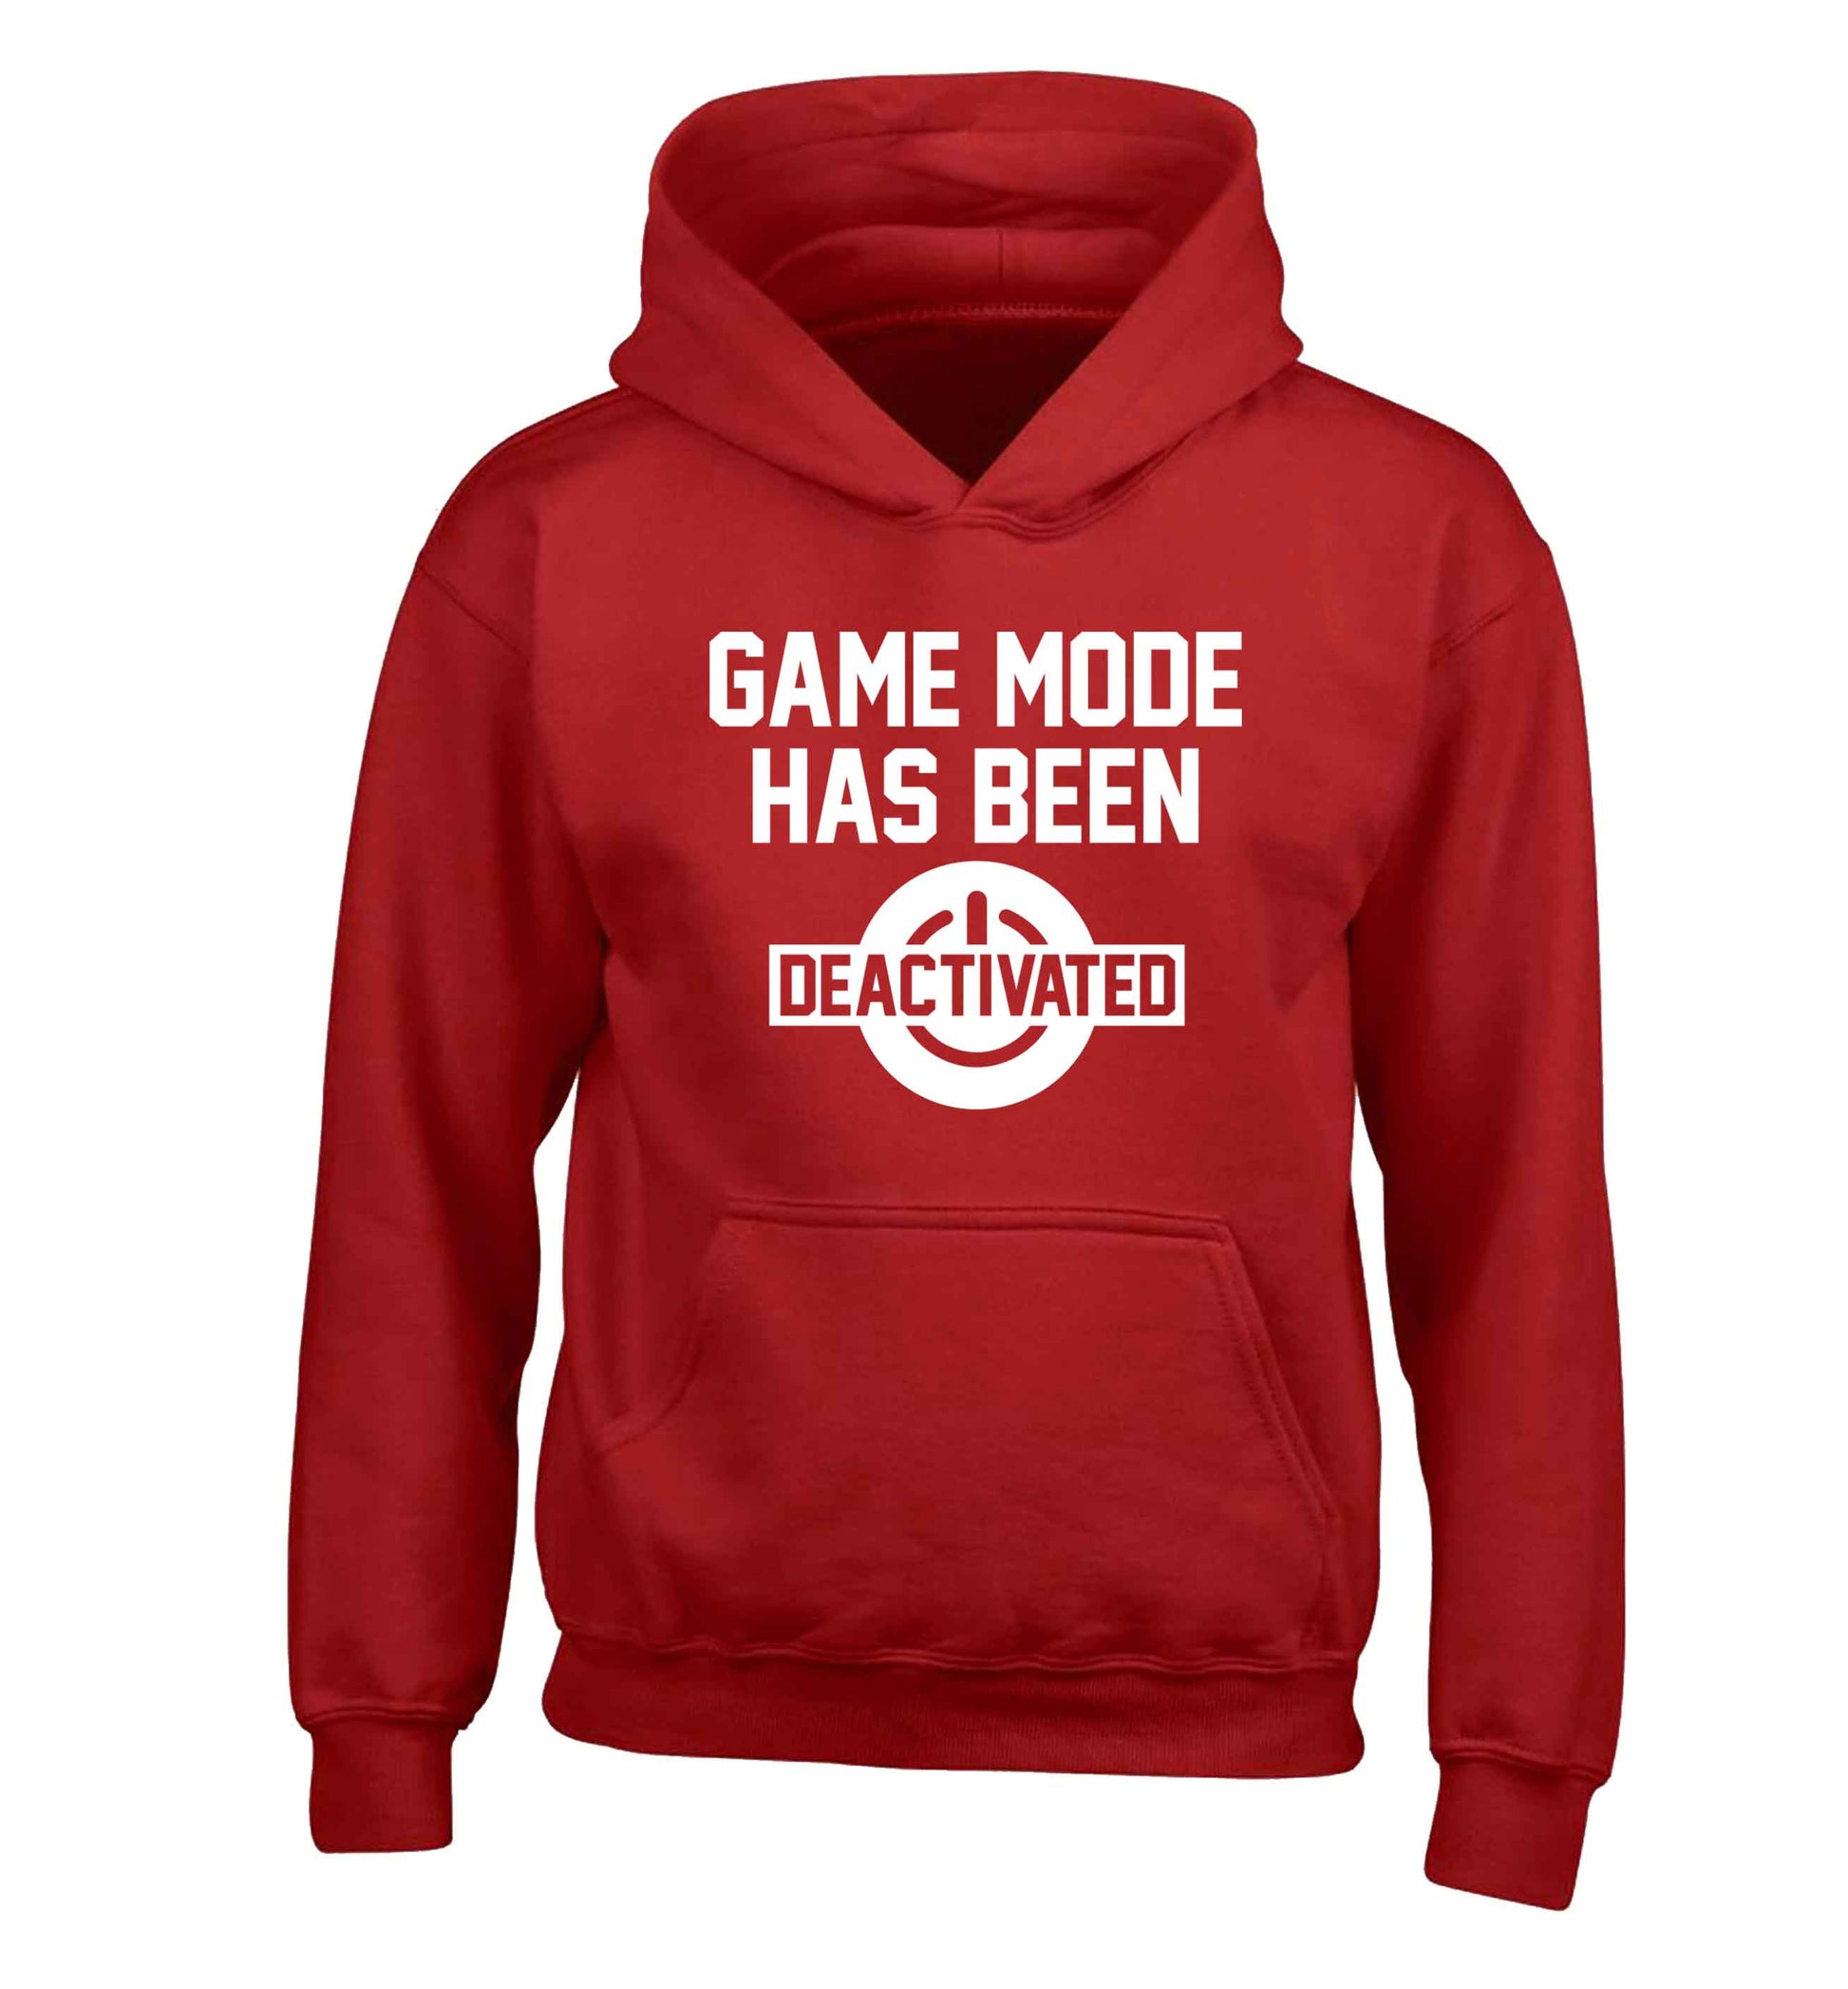 Game Mode Has Been Deactivated children's red hoodie 12-13 Years